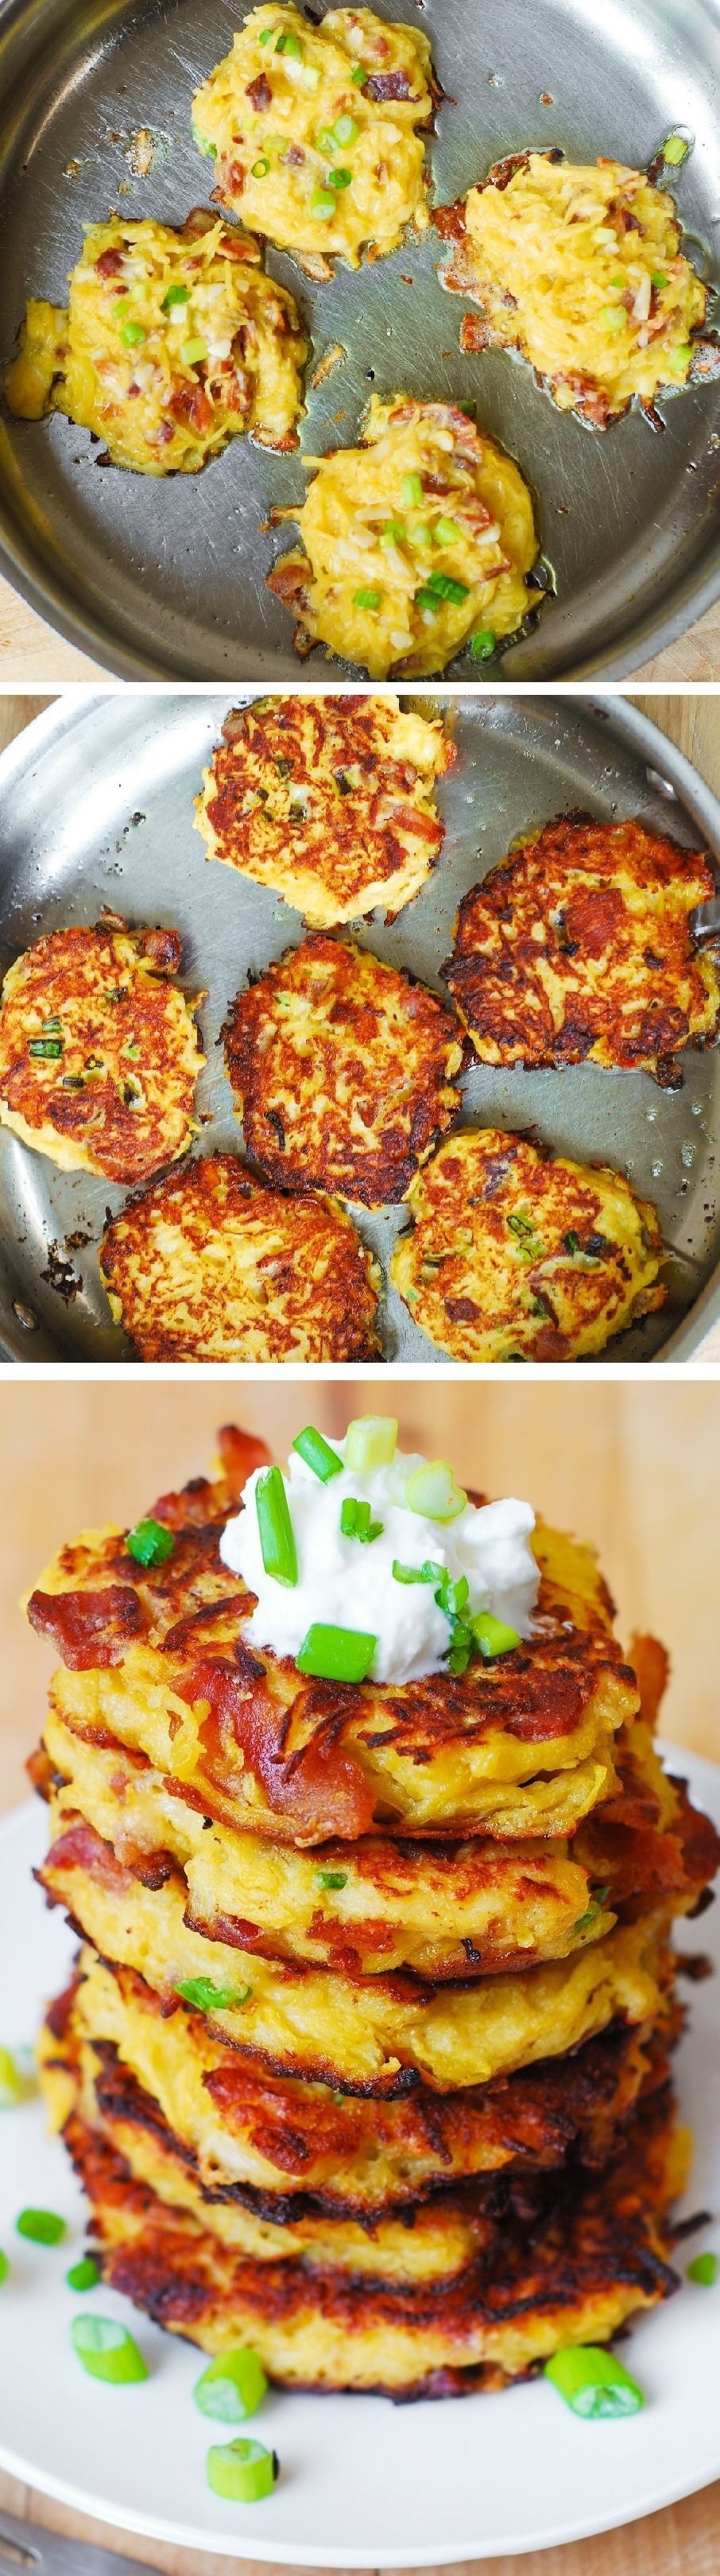 Bacon, Spaghetti Squash, and Parmesan Fritters. So unbelievably good!  Kids love